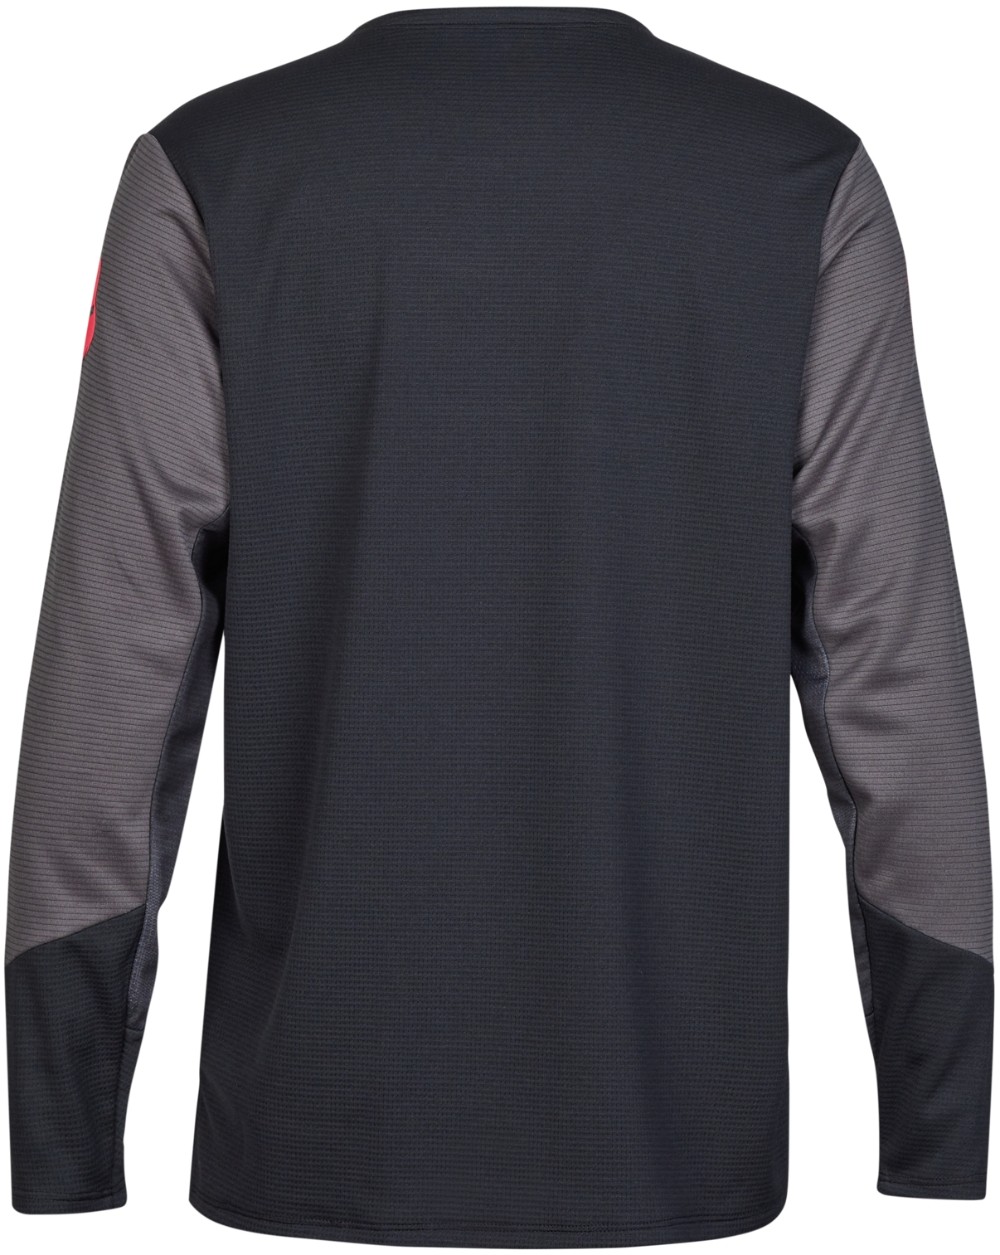 Defend Youth Long Sleeve MTB Jersey Taunt image 1